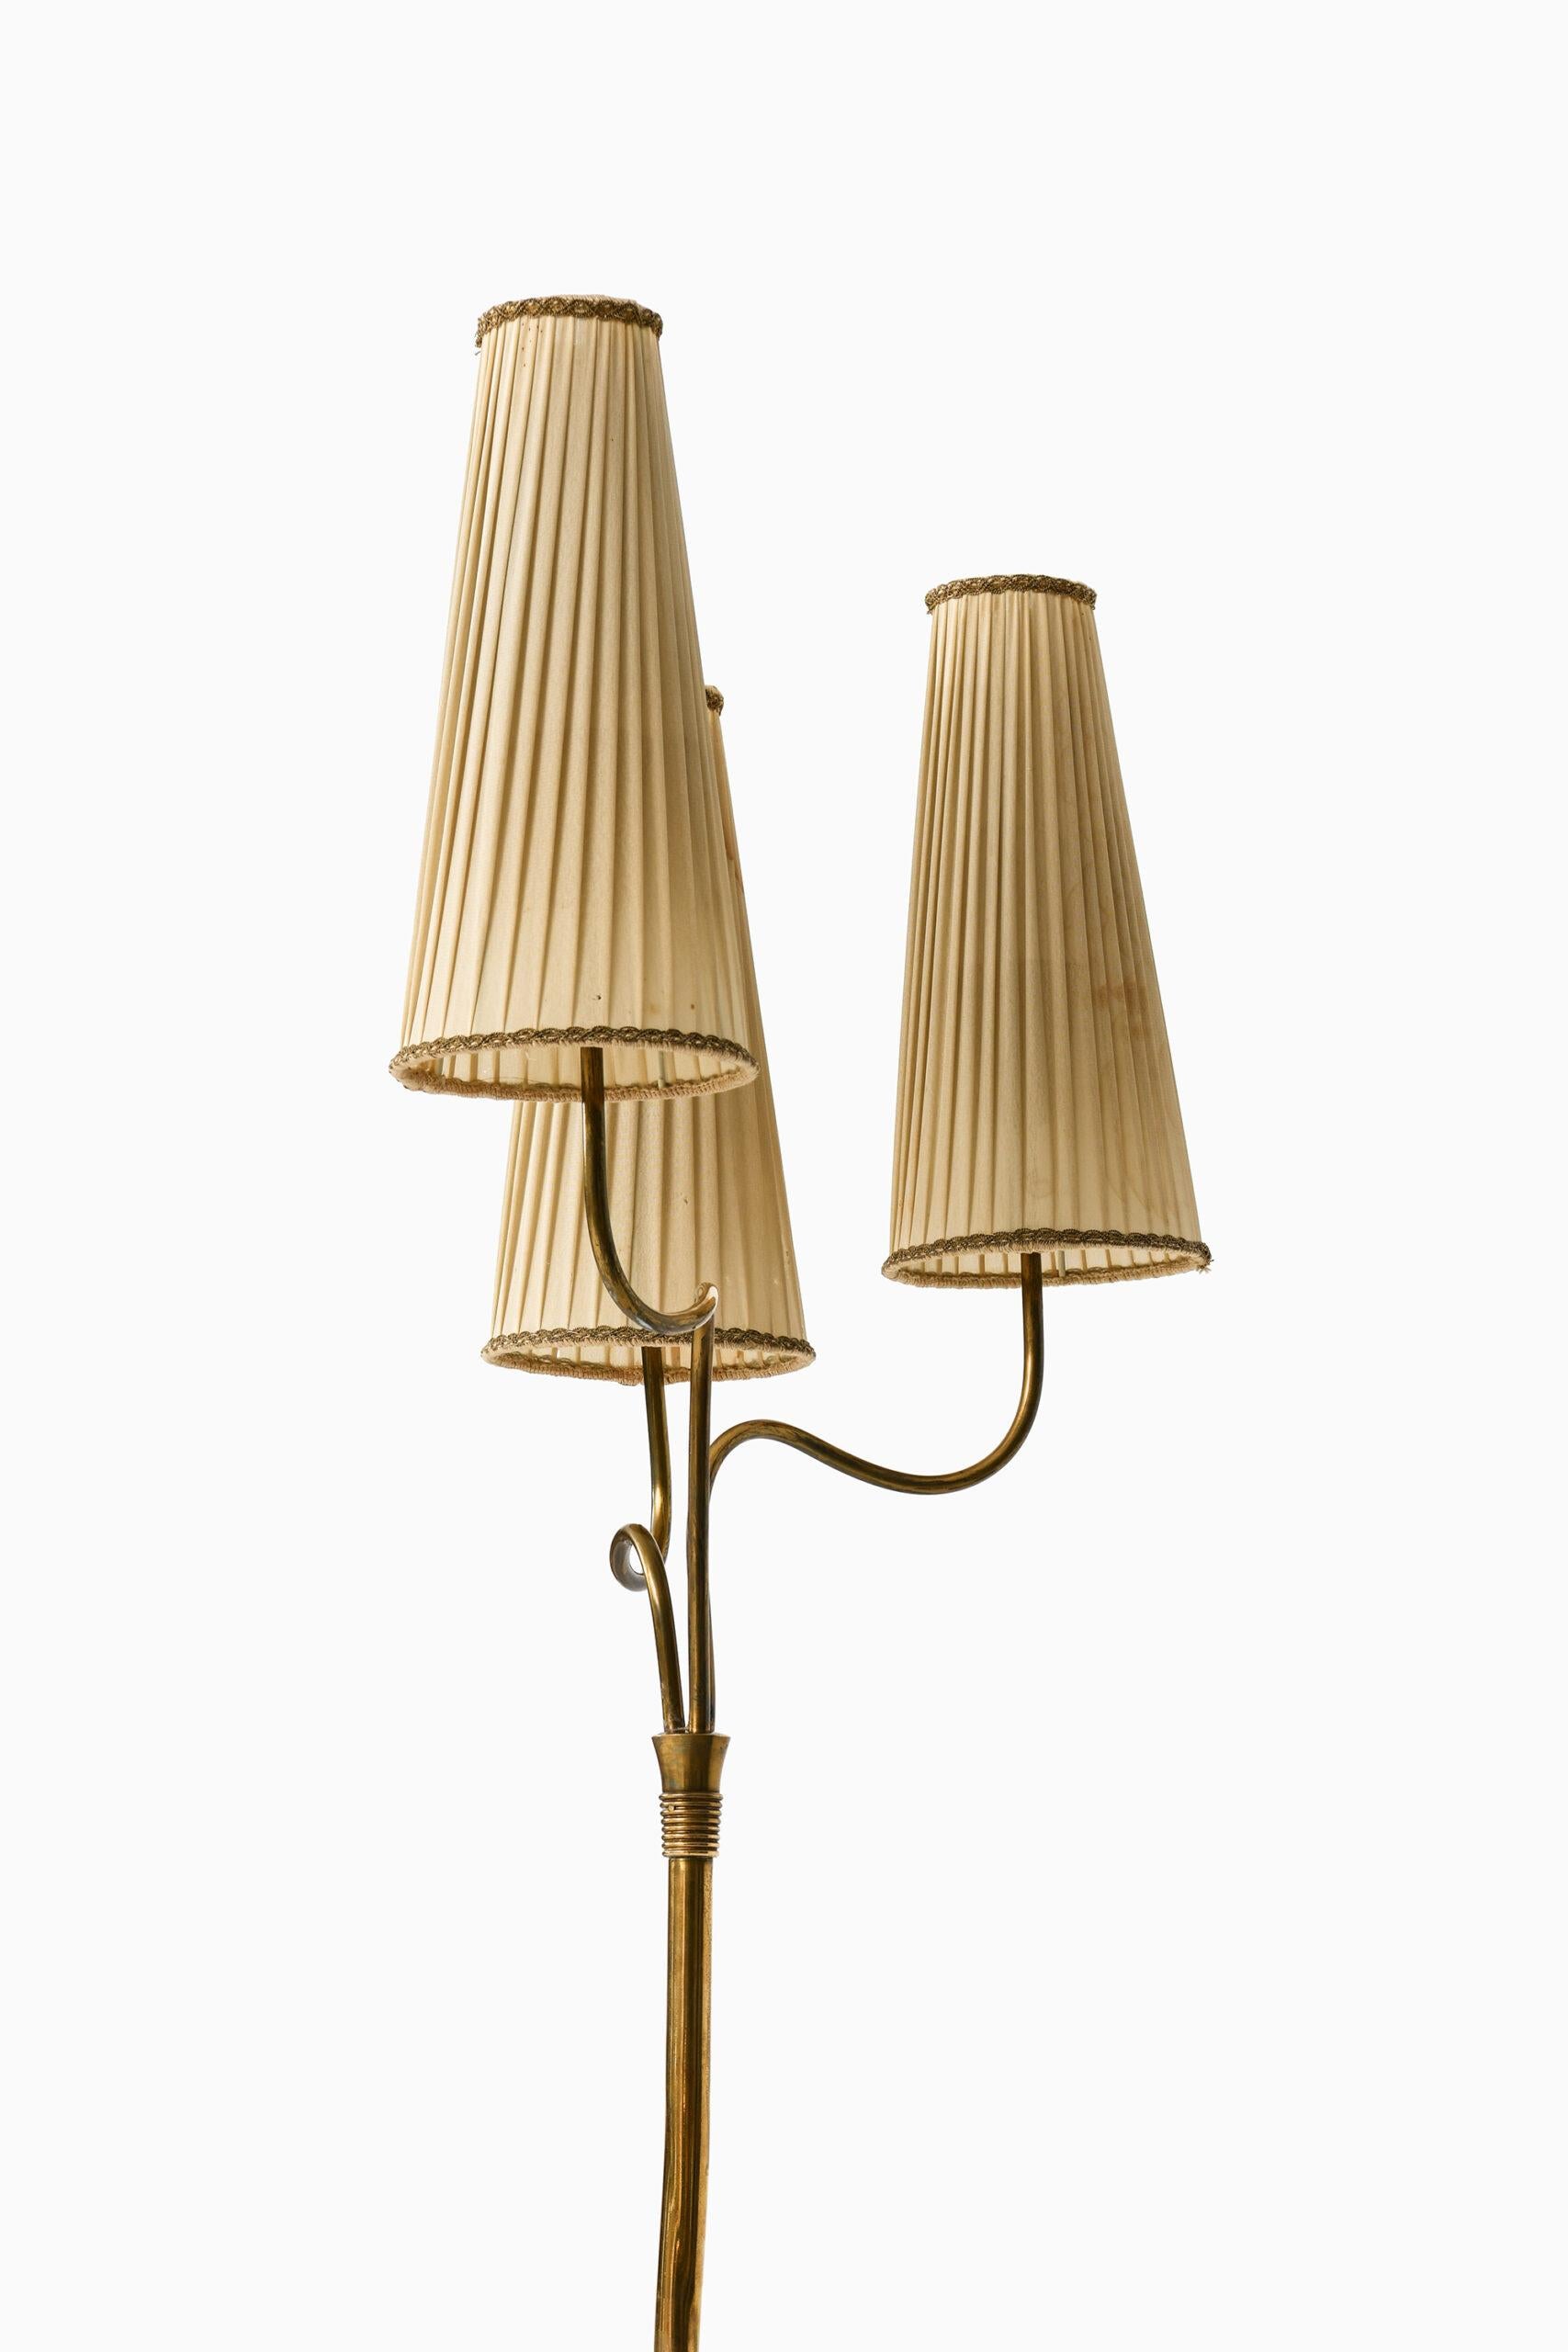 Mid-20th Century Floor Lamp Produced by Itsu in Finland For Sale